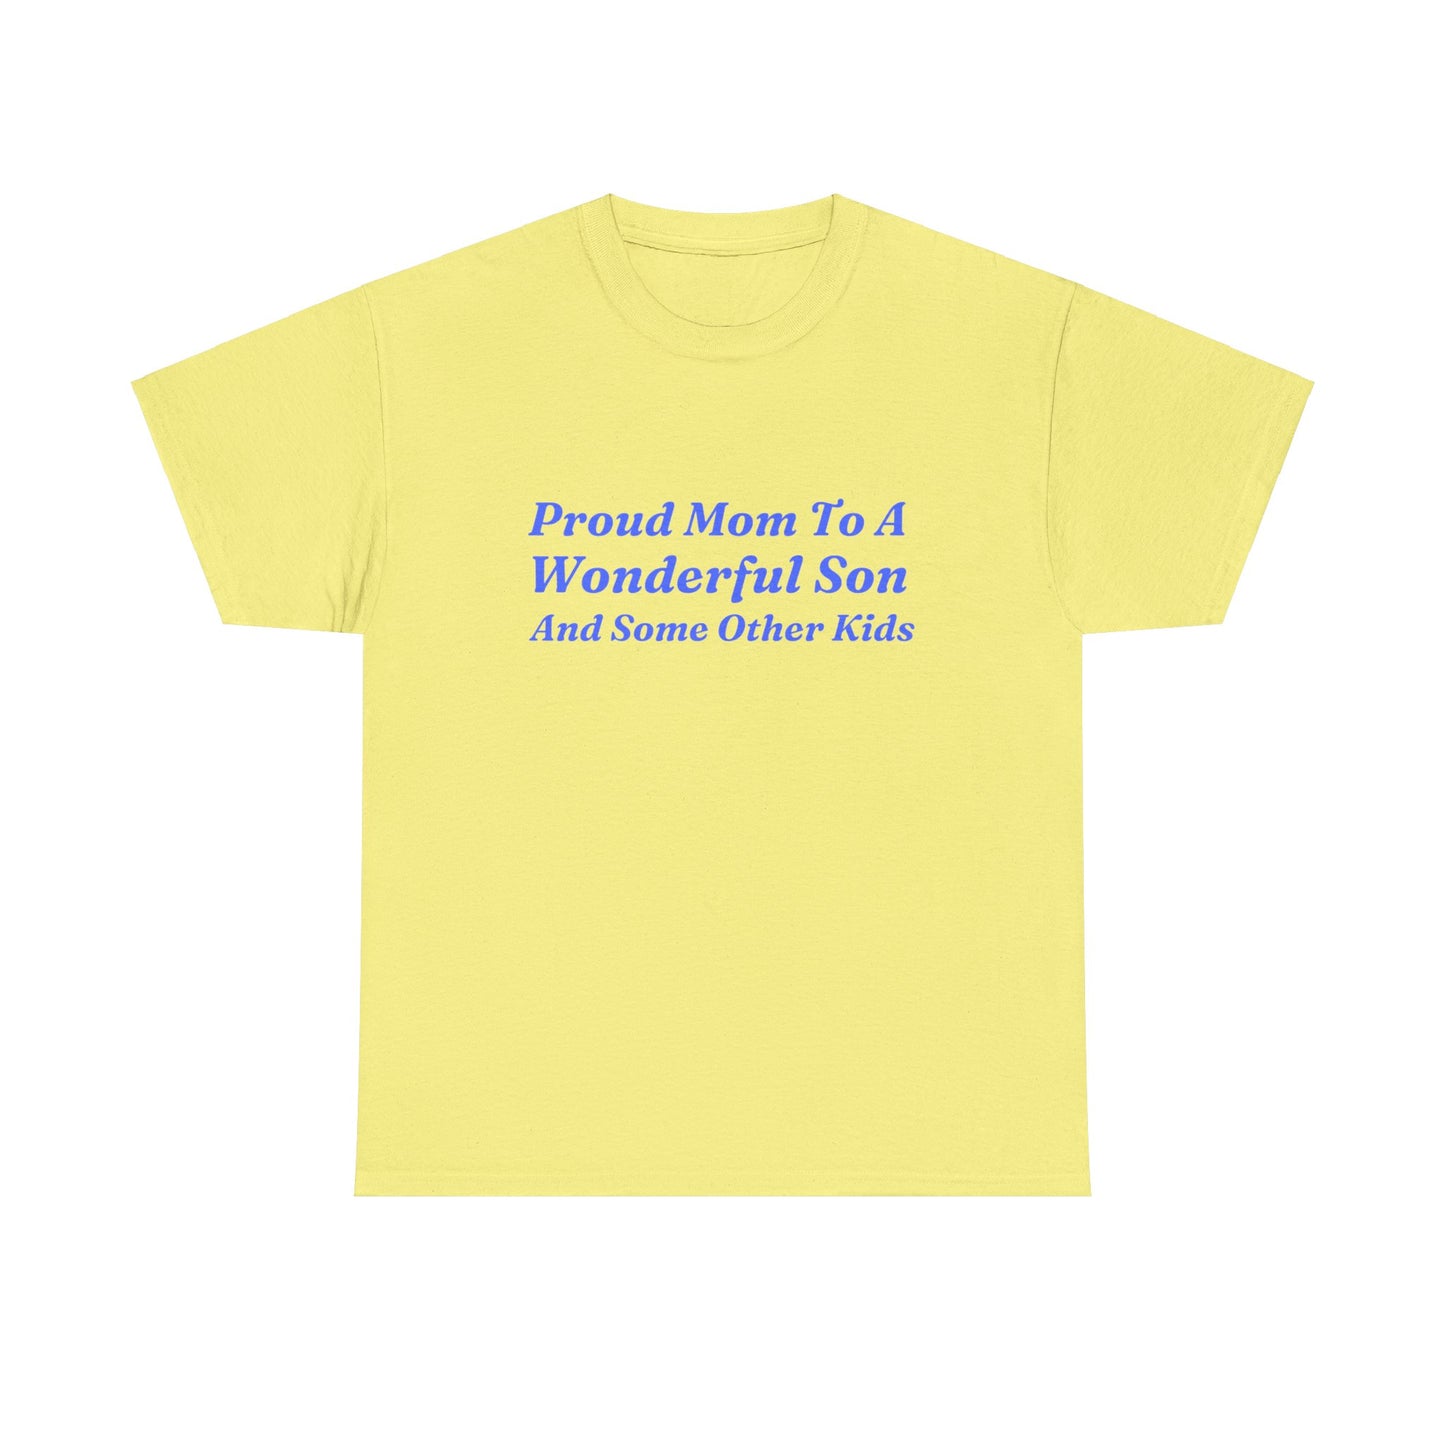 "Proud Mom To A Wonderful Son And Some Other Kids" Shirt